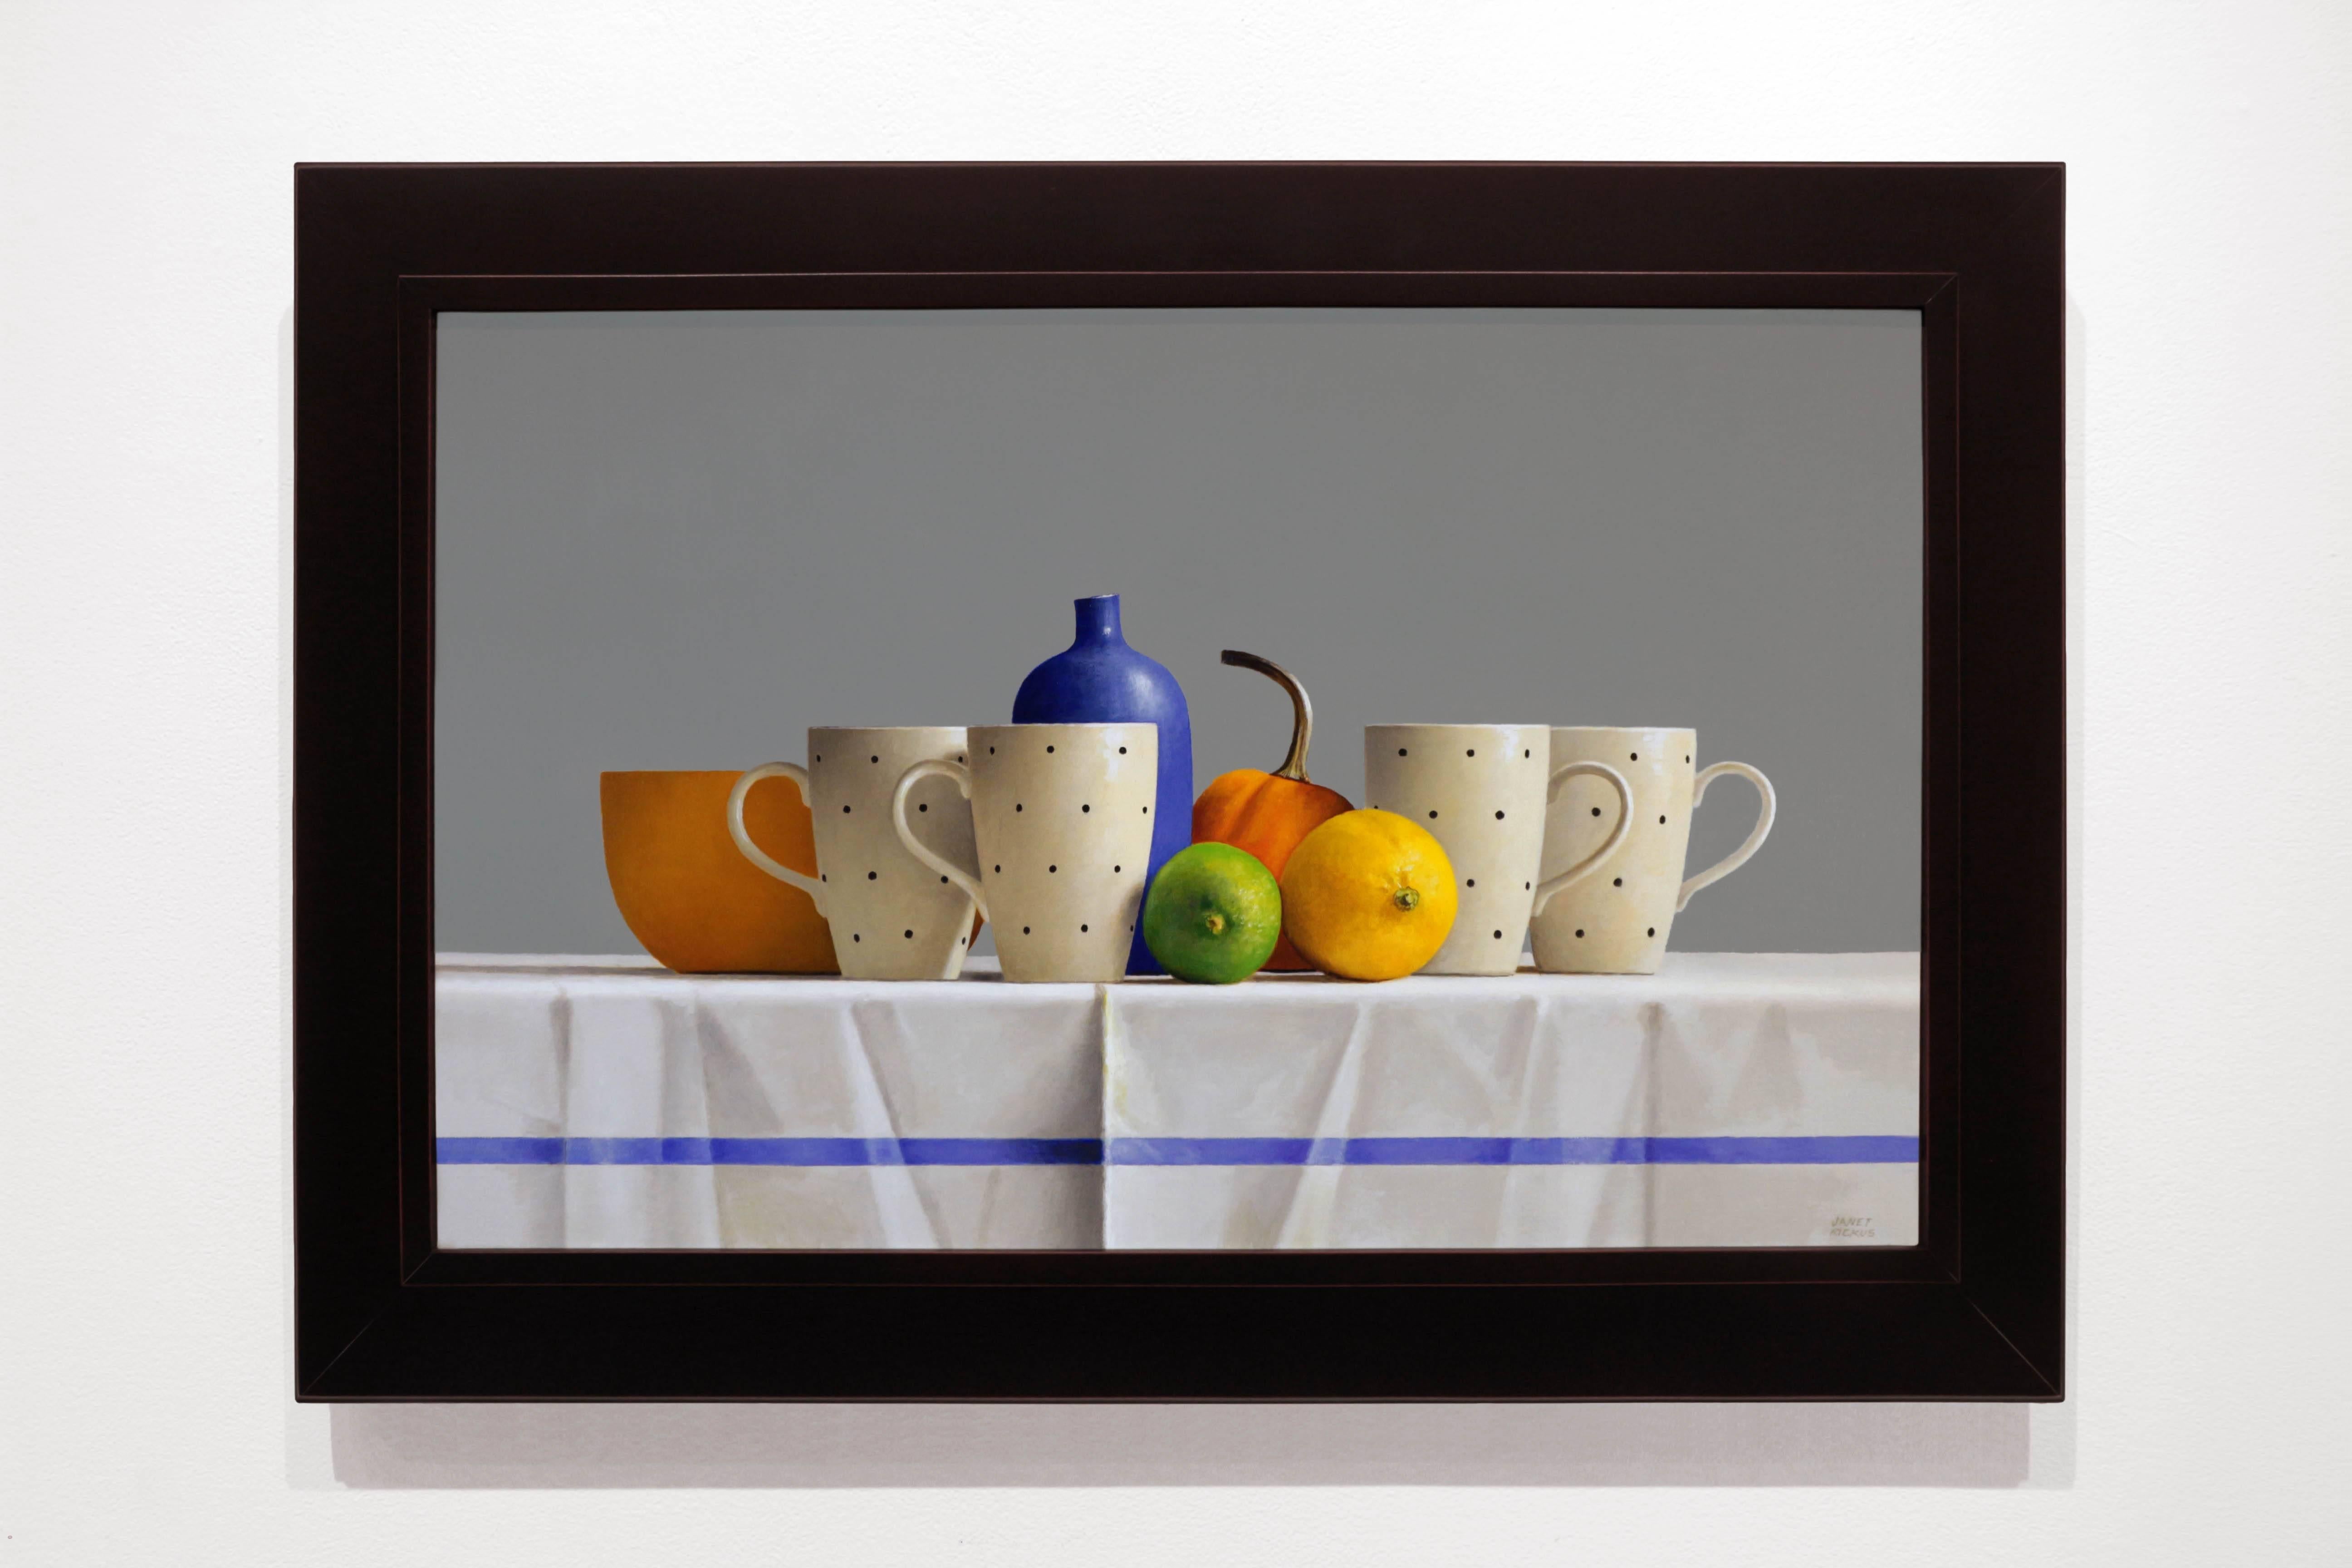 FOUR POLKA DOT CUPS, FRUIT, CUPS ON TABLE, BLUE, YELLOW, WHITE, PORCELAIN  - Painting by Janet Rickus